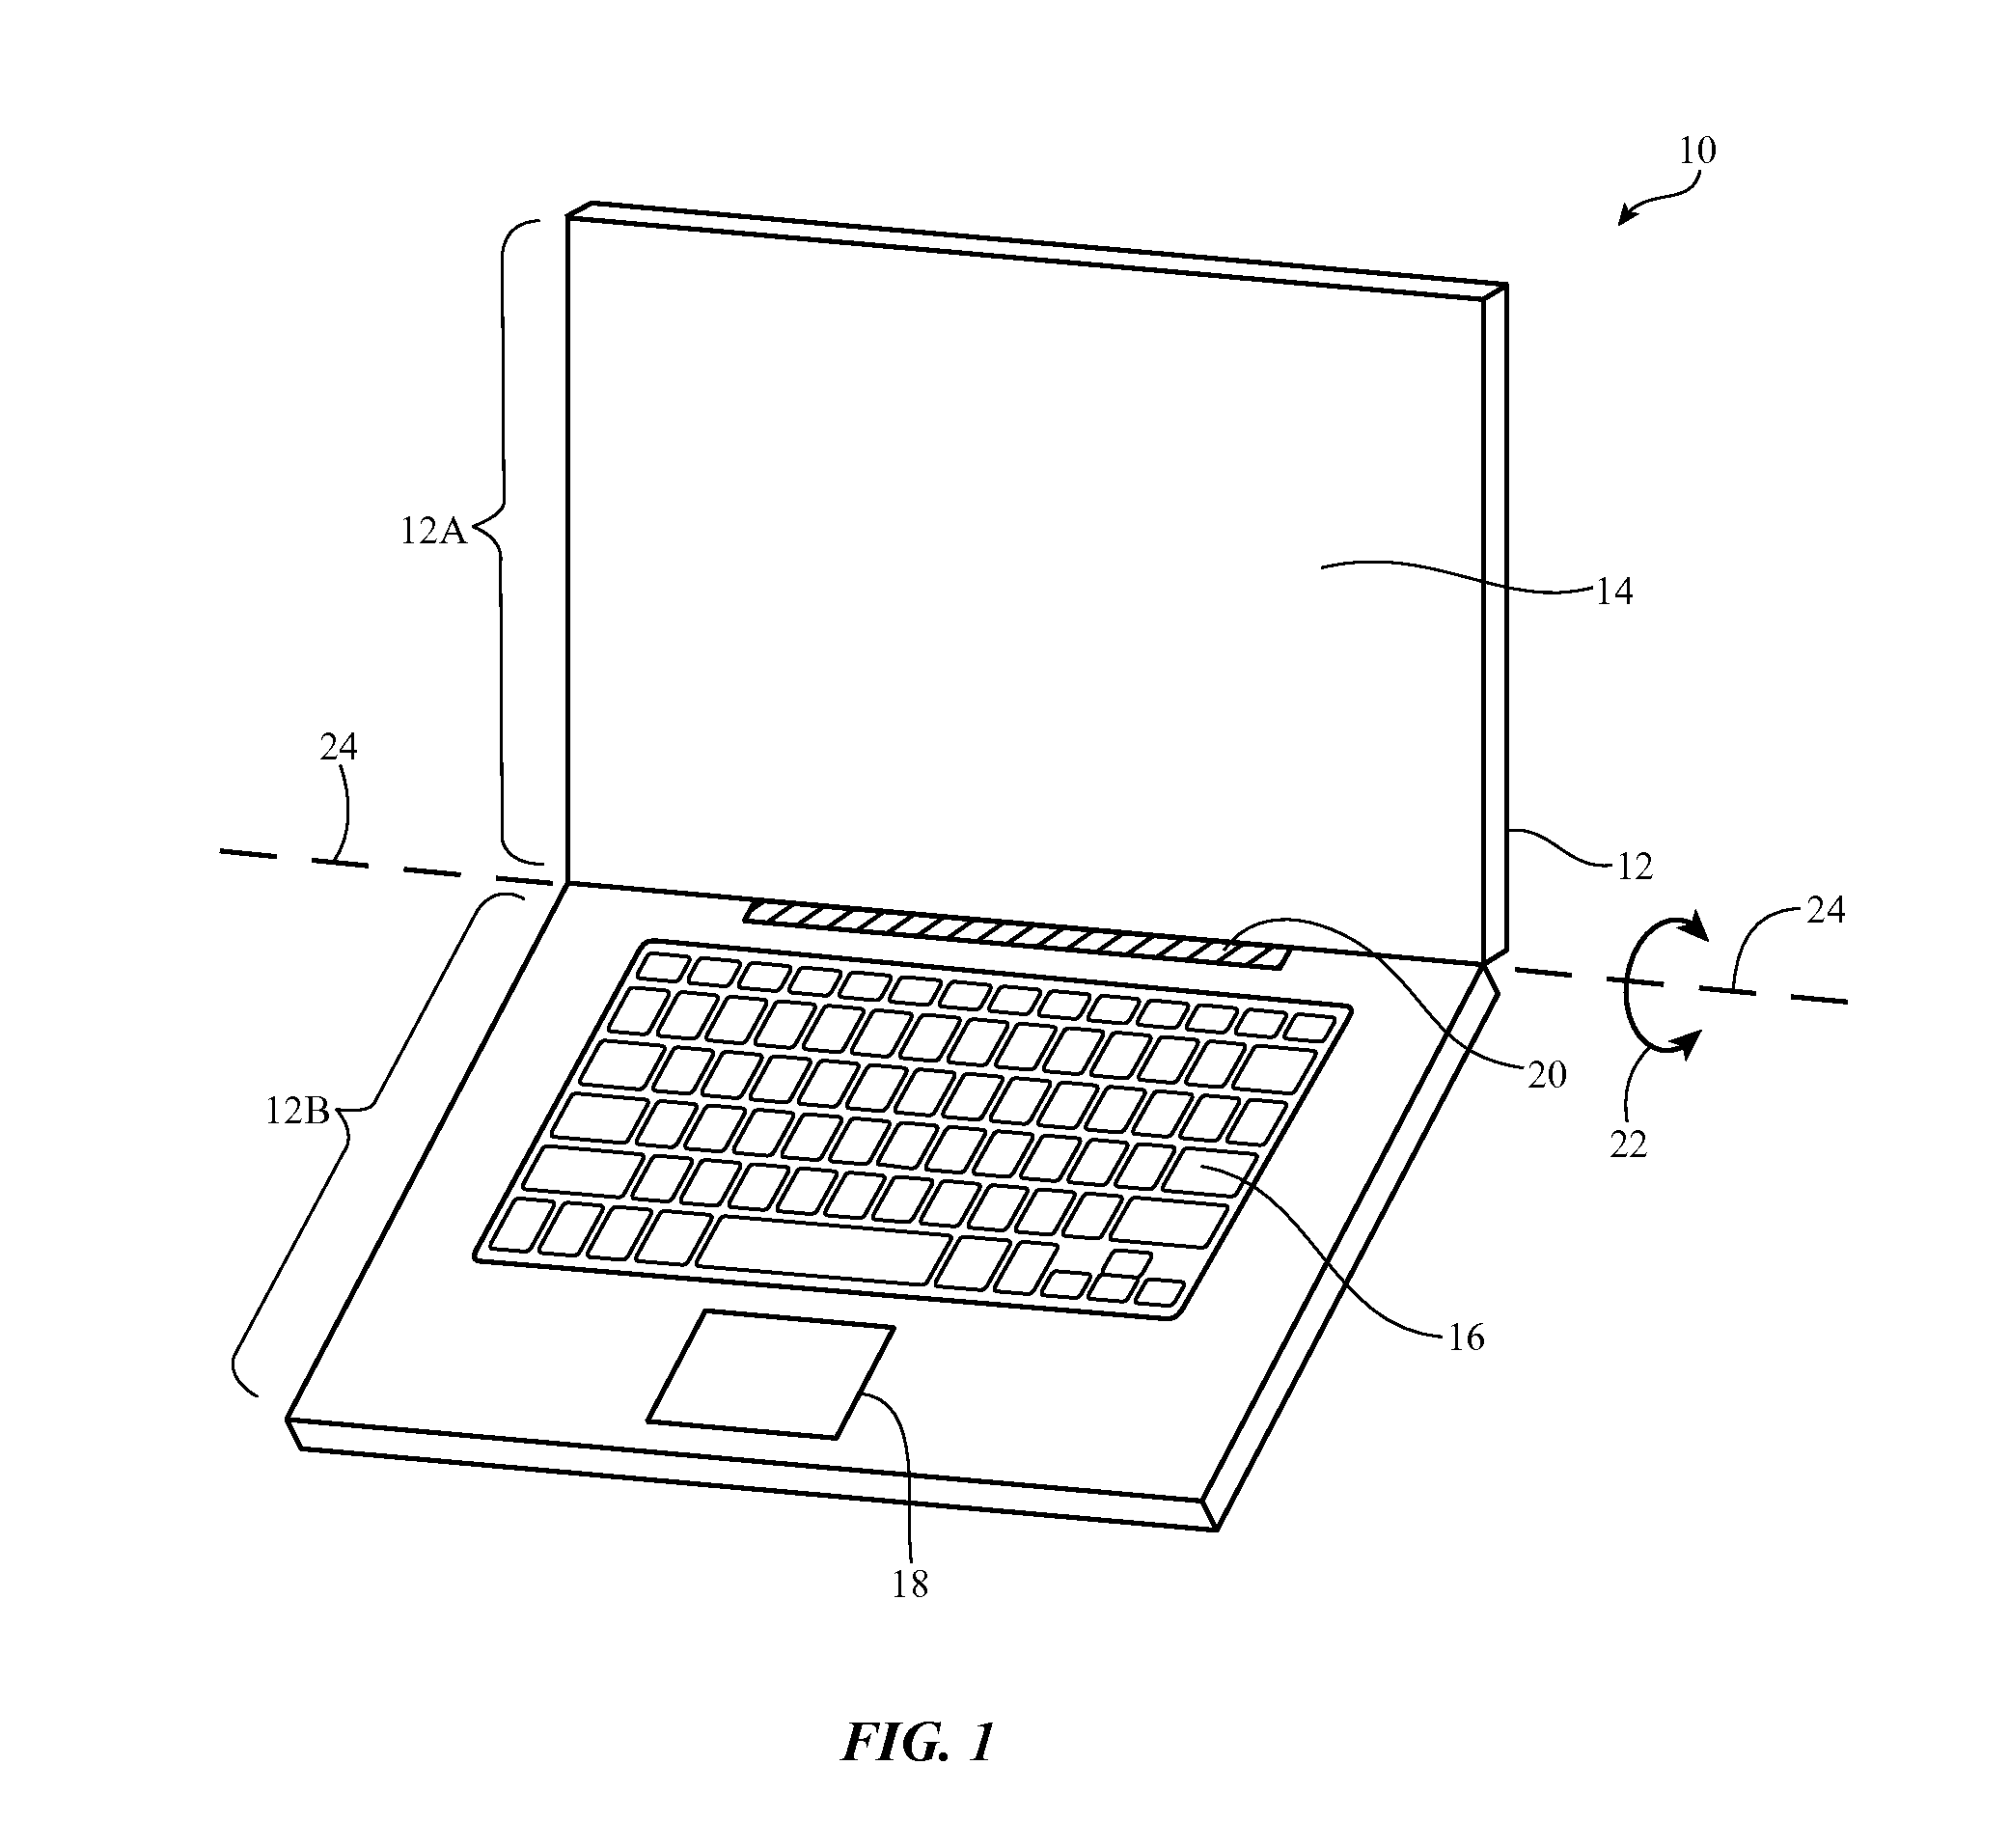 Display Having Backlight With Narrowband Collimated Light Sources